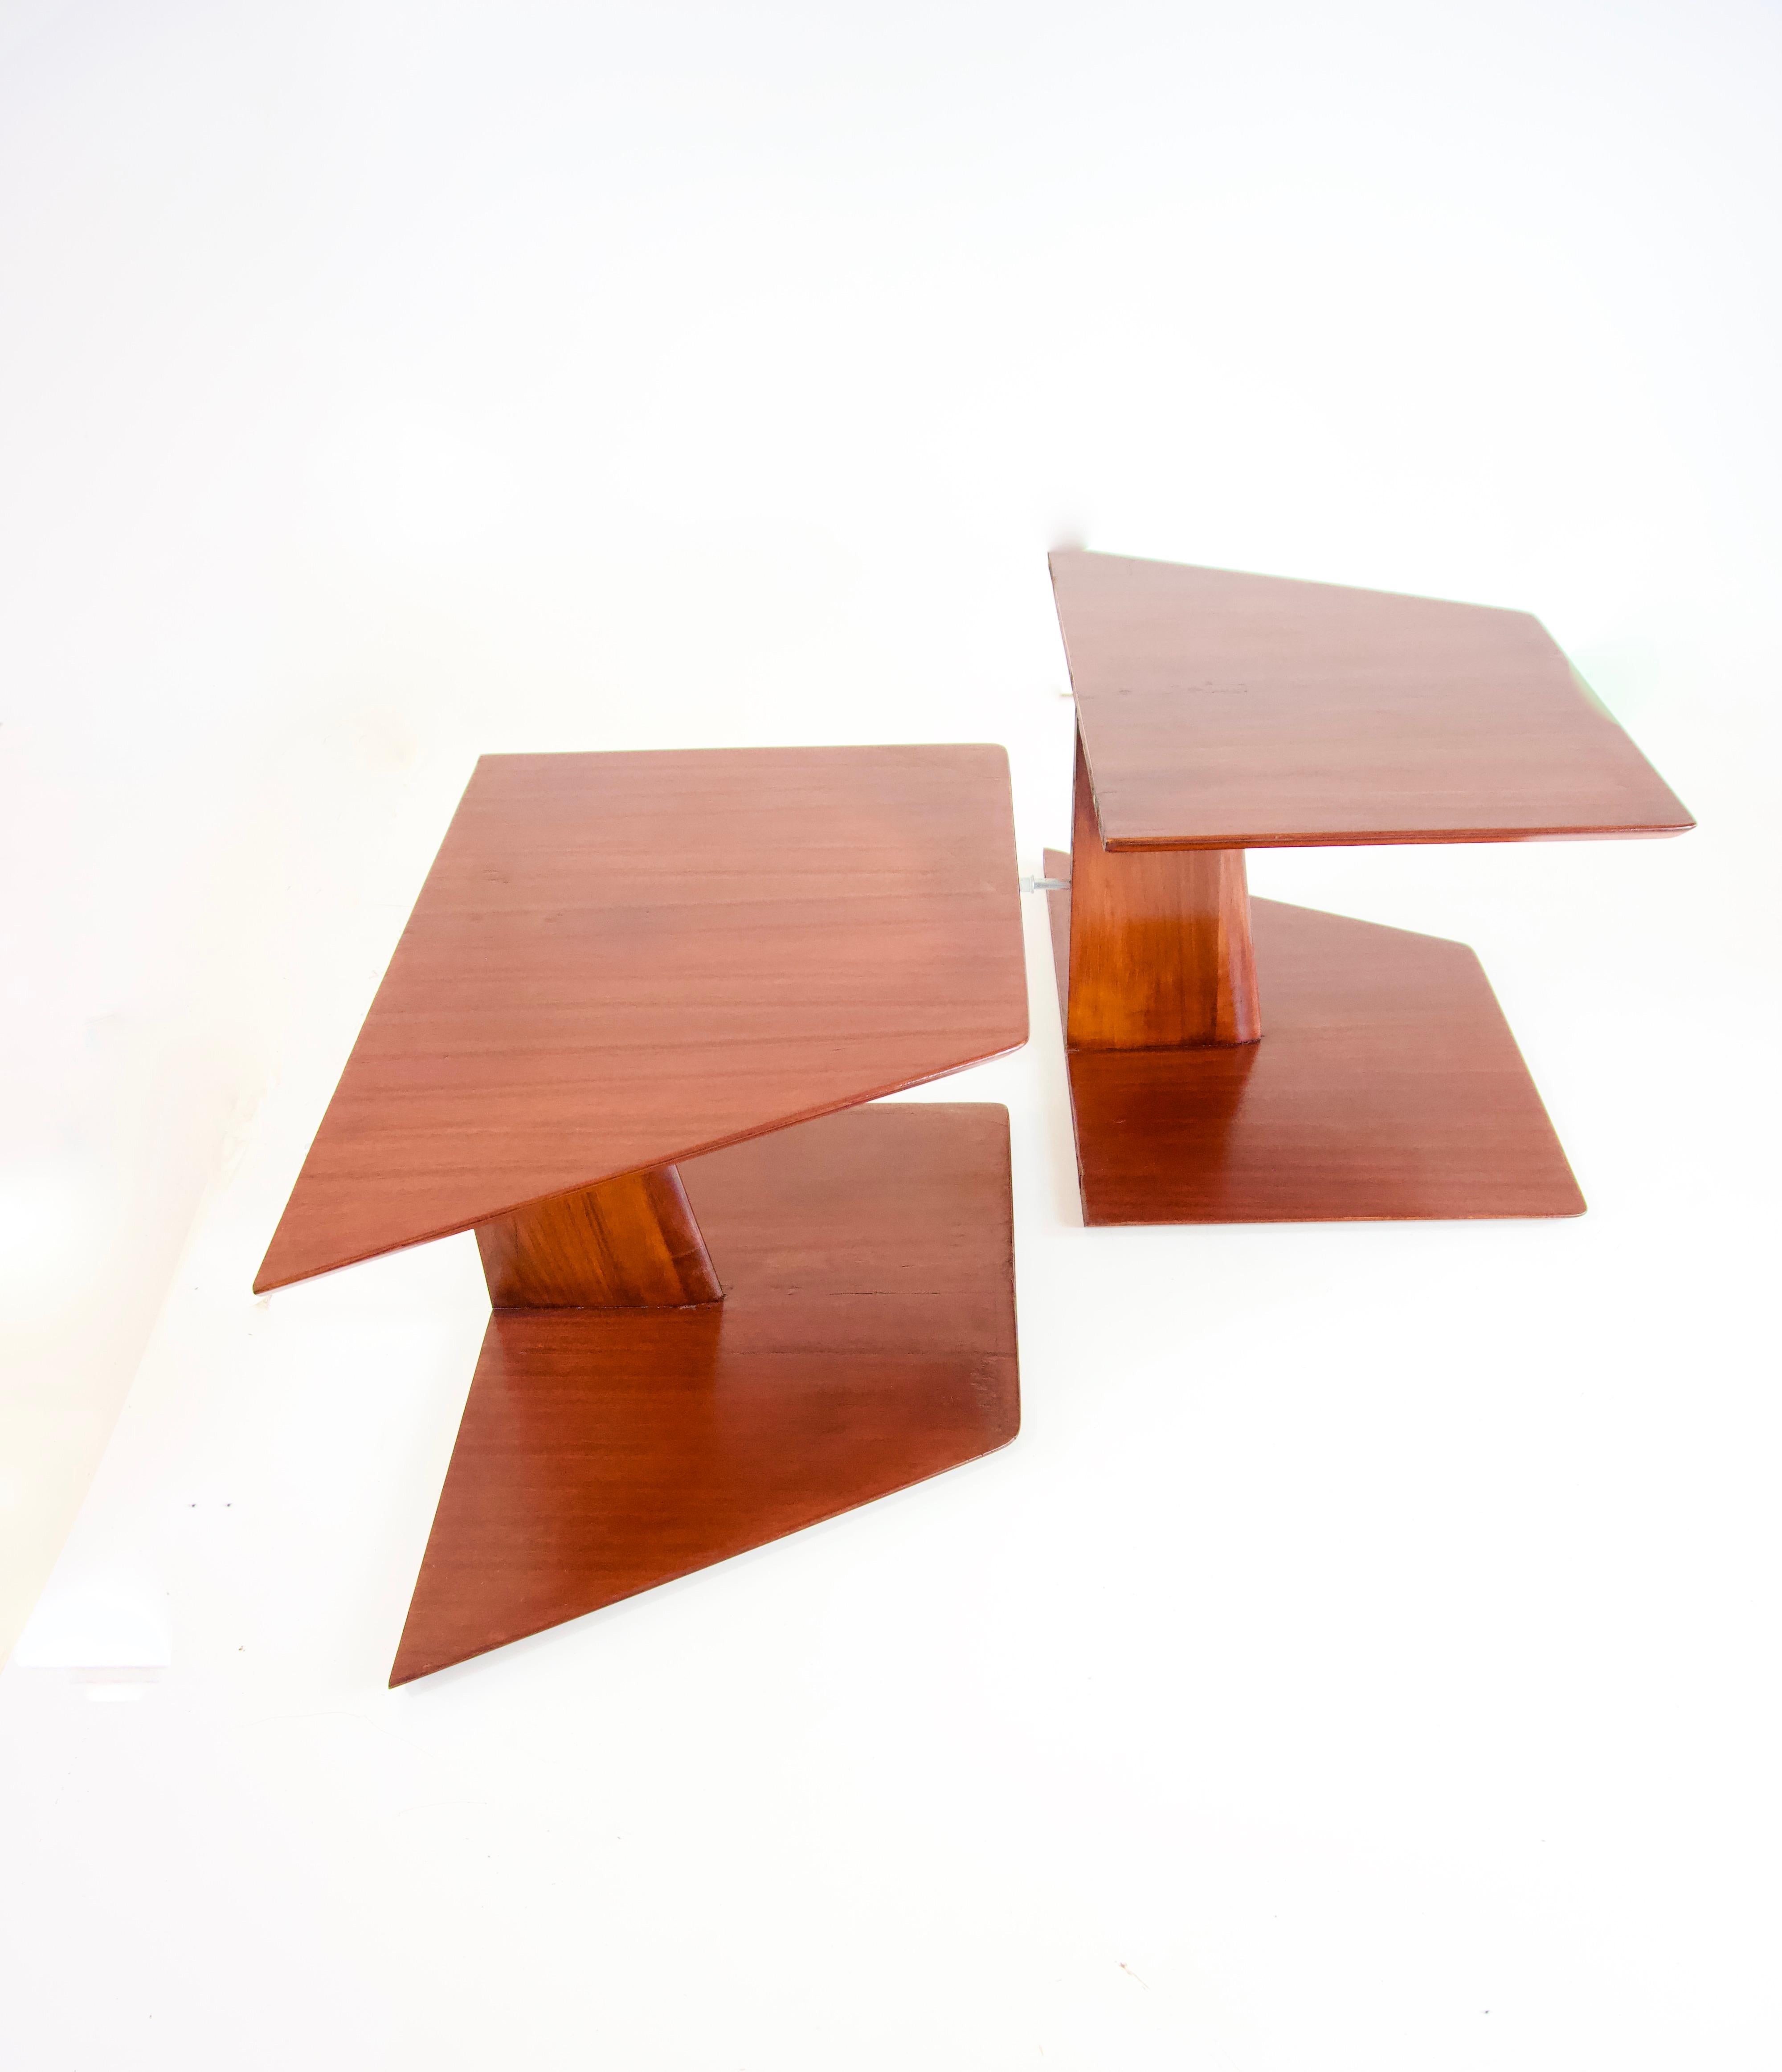 pair of hanging oak  wood nightstands or bed side tables by Gio Ponti 
wall mounted two shelves side tables
finishing of the owl's beak top
part of a pair of  original headboards where headboards were destroyed
by Gio Ponti from the furniture of the